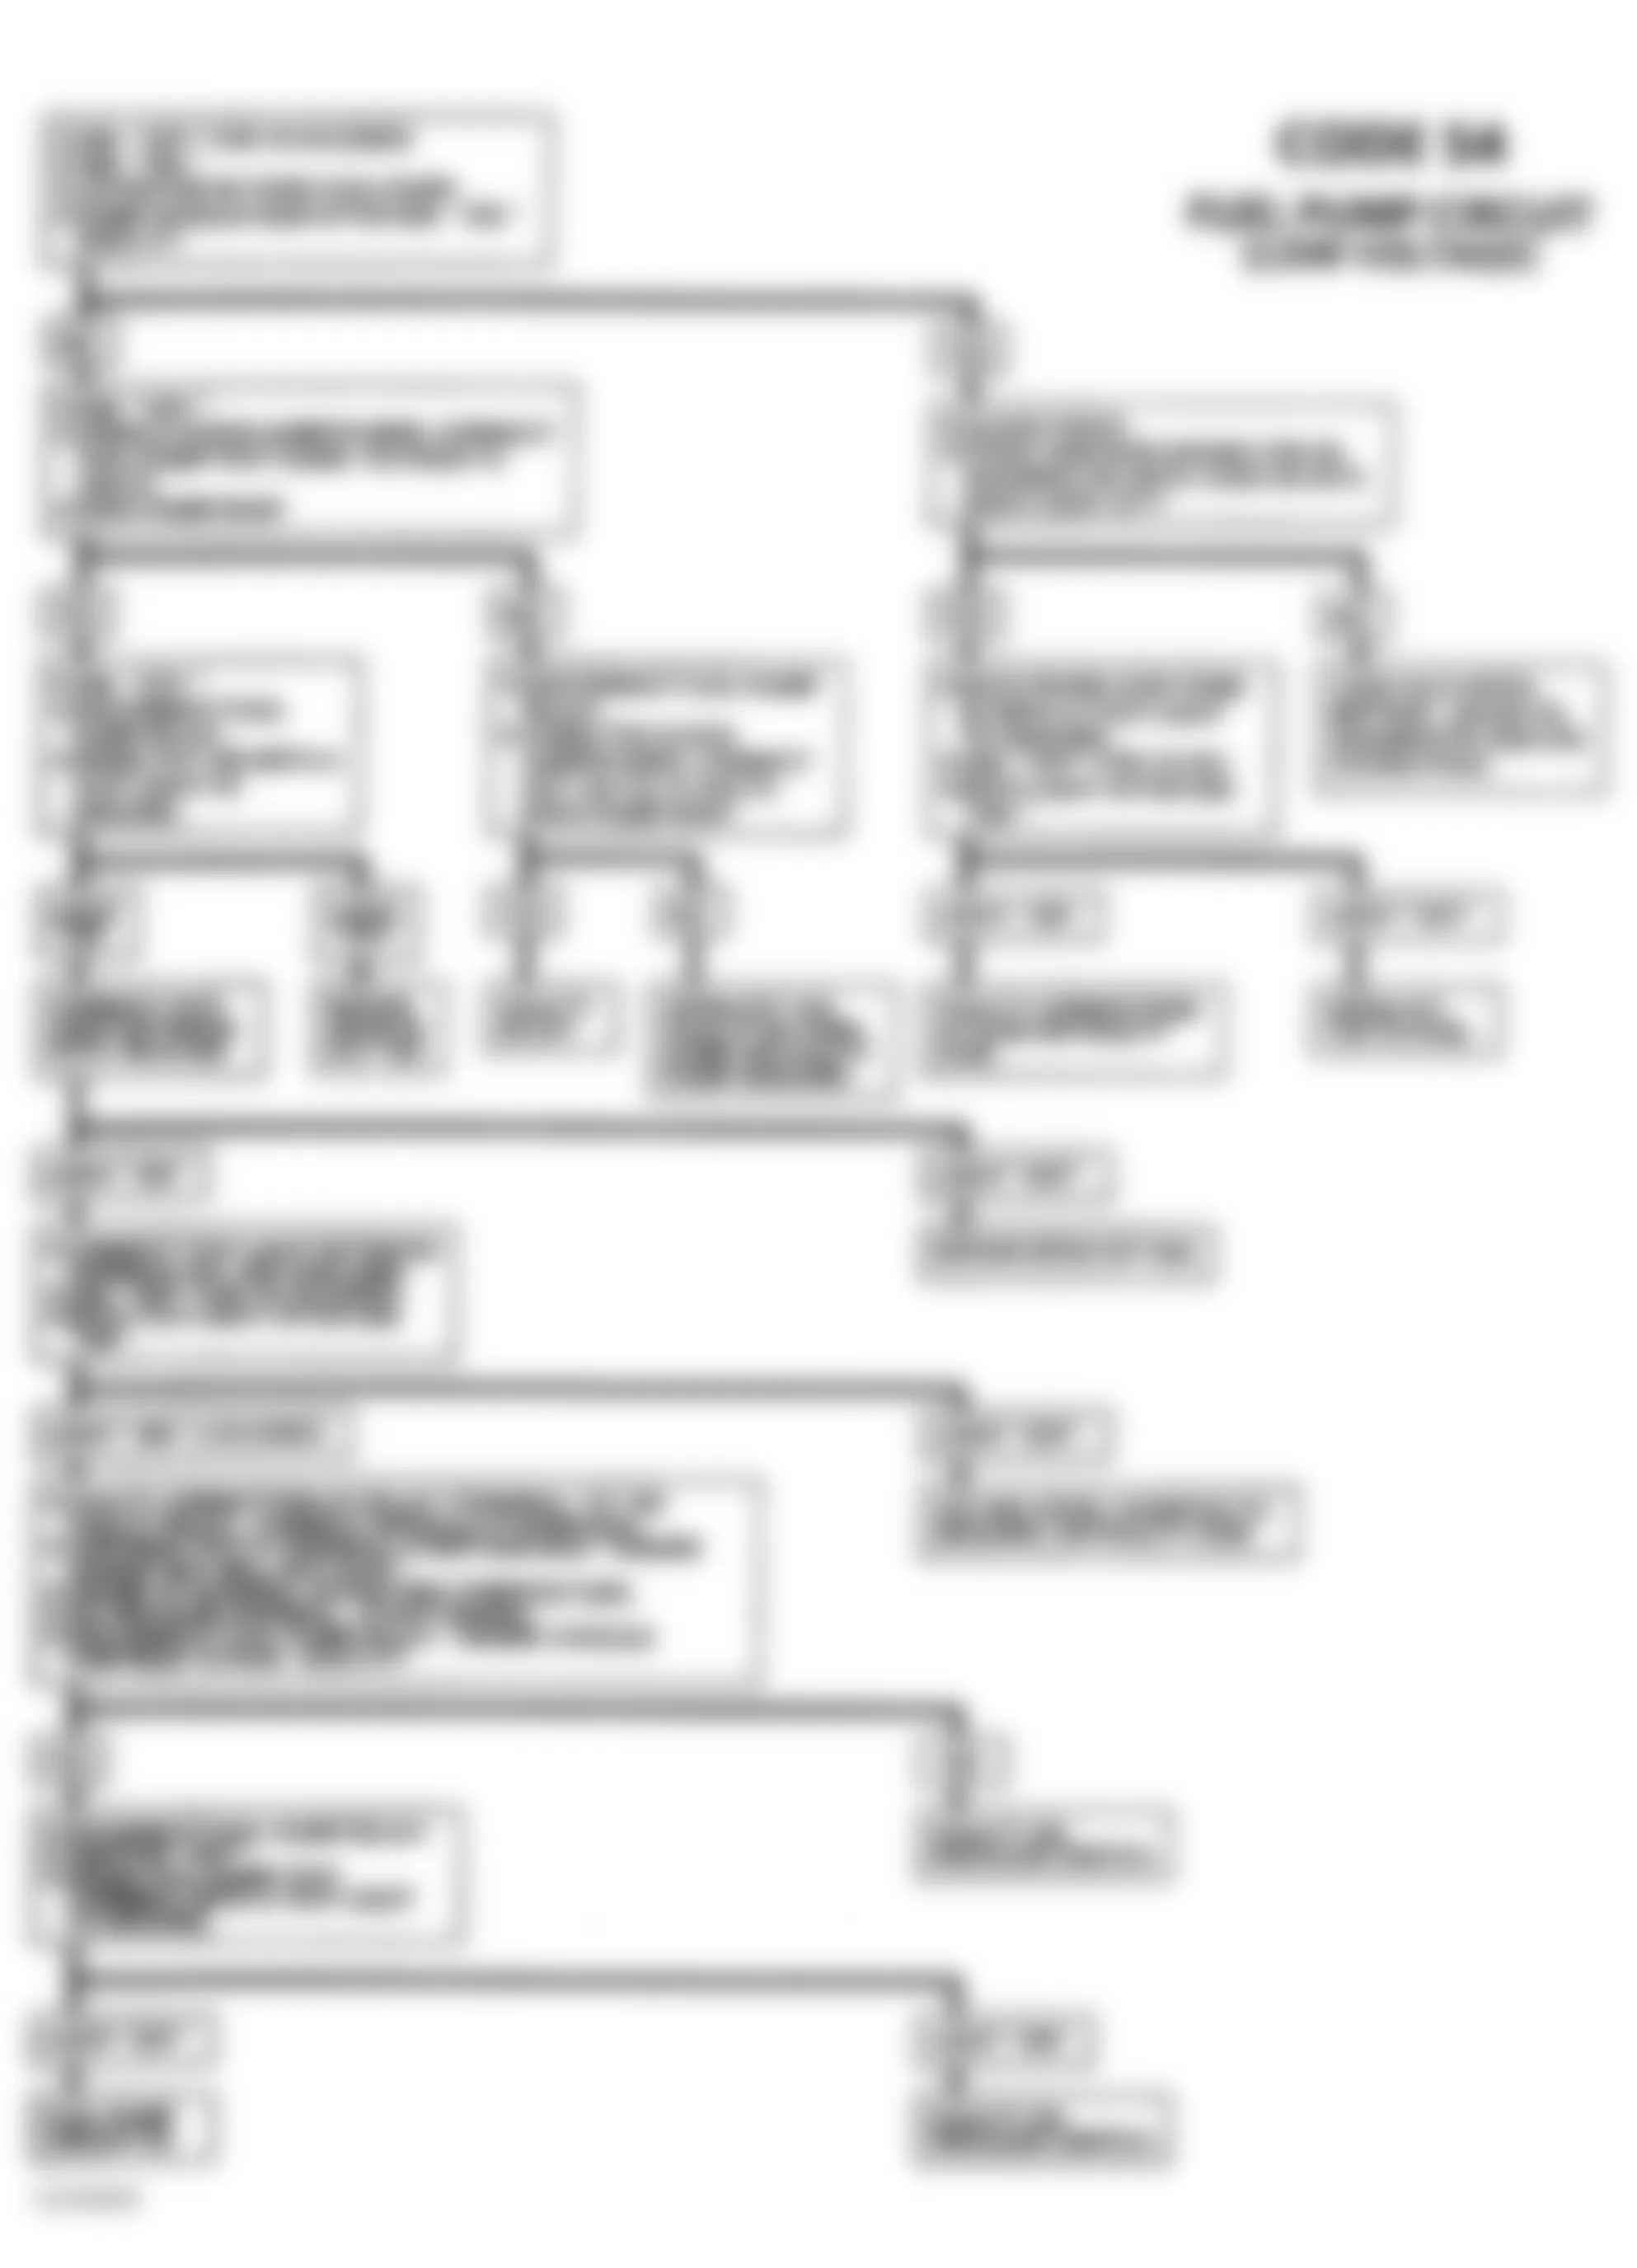 Chevrolet Lumina APV 1991 - Component Locations -  Code 54 Diagnostic Flow Chart (S & T Series Only)